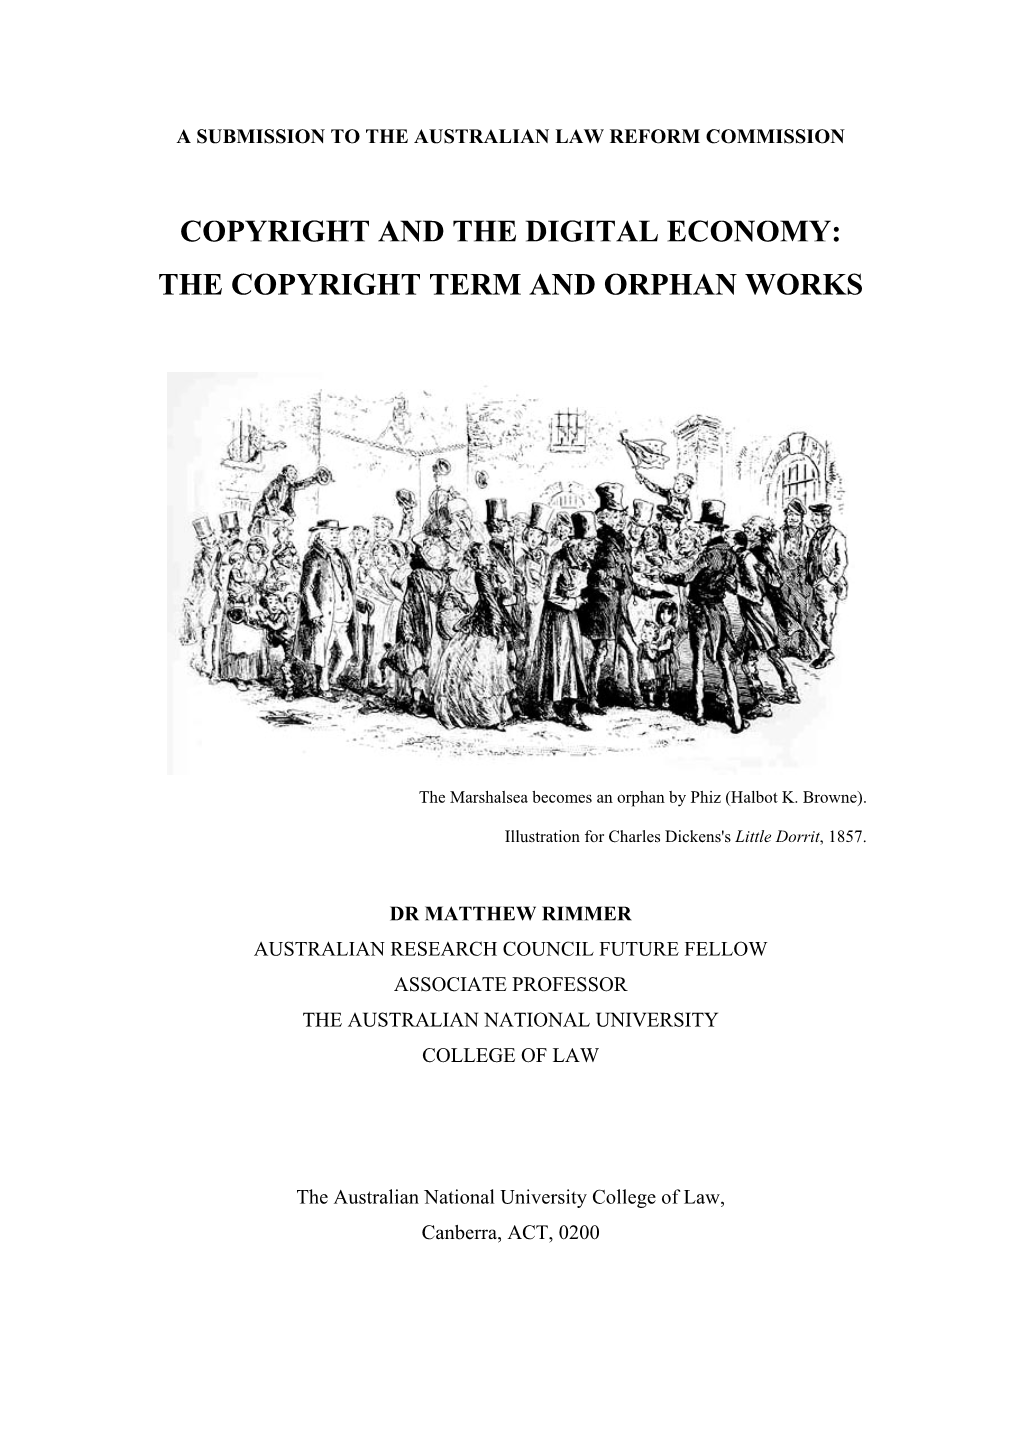 The Copyright Term and Orphan Works